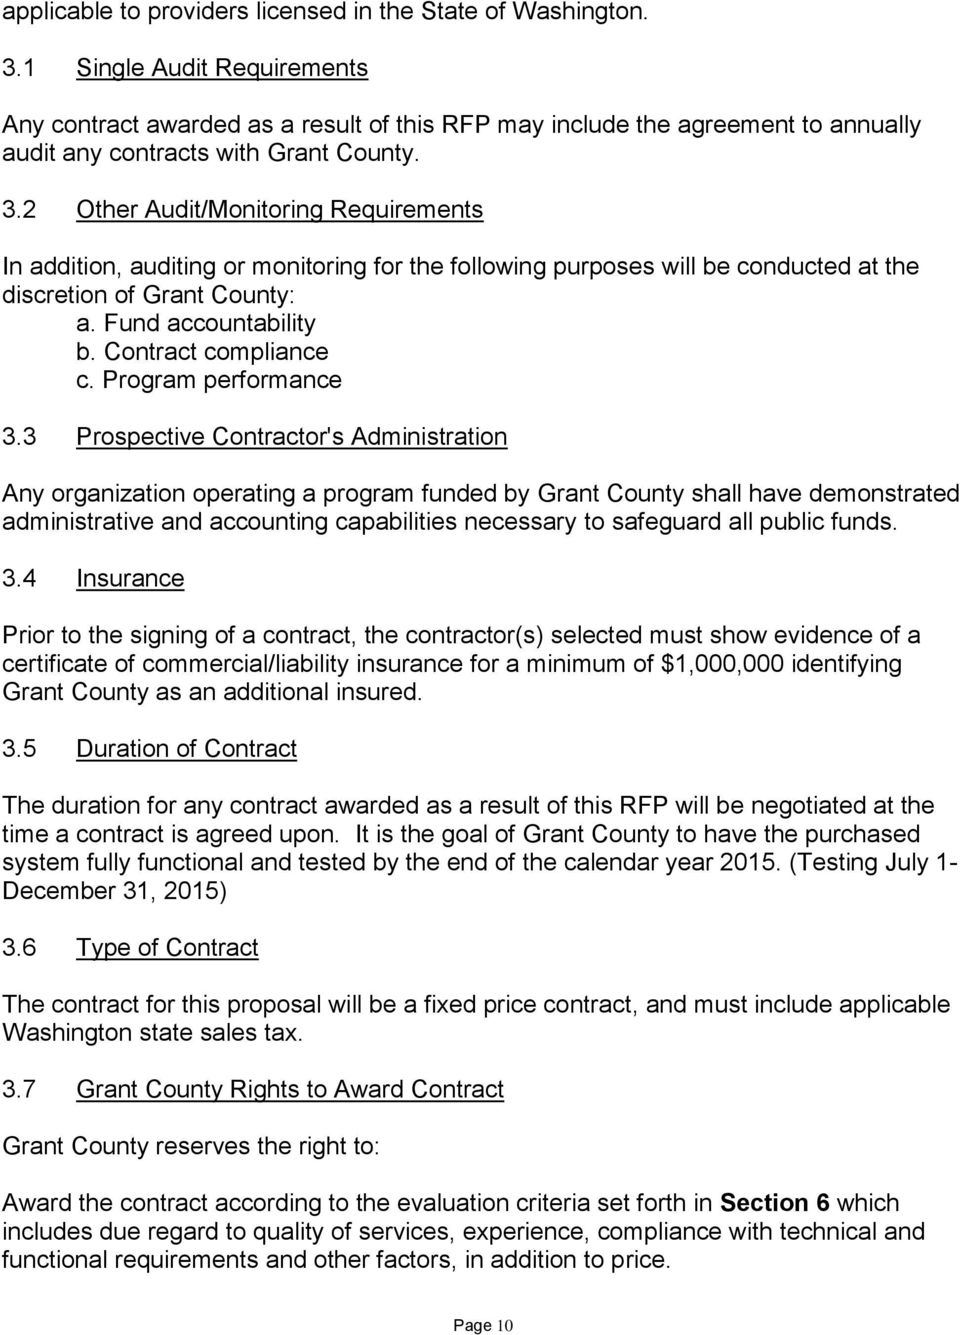 2 Other Audit/Monitoring Requirements In addition, auditing or monitoring for the following purposes will be conducted at the discretion of Grant County: a. Fund accountability b.